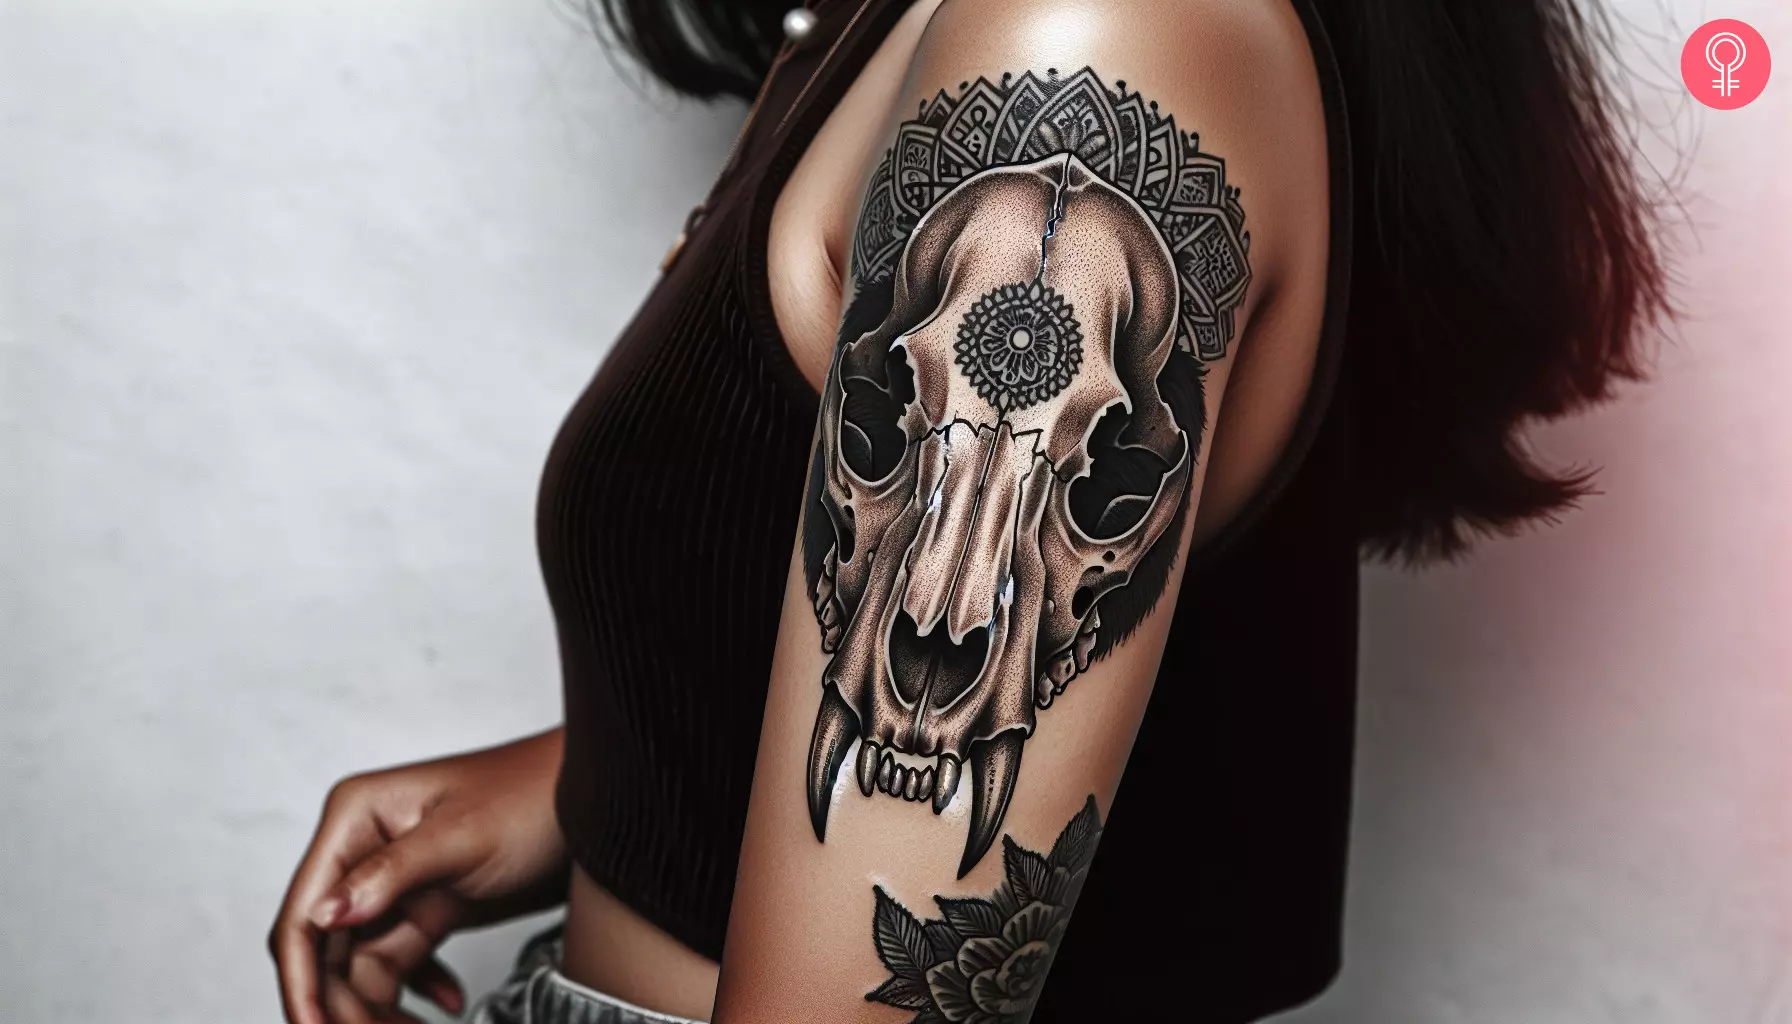 Woman with bear skull tattoo on her upper arm